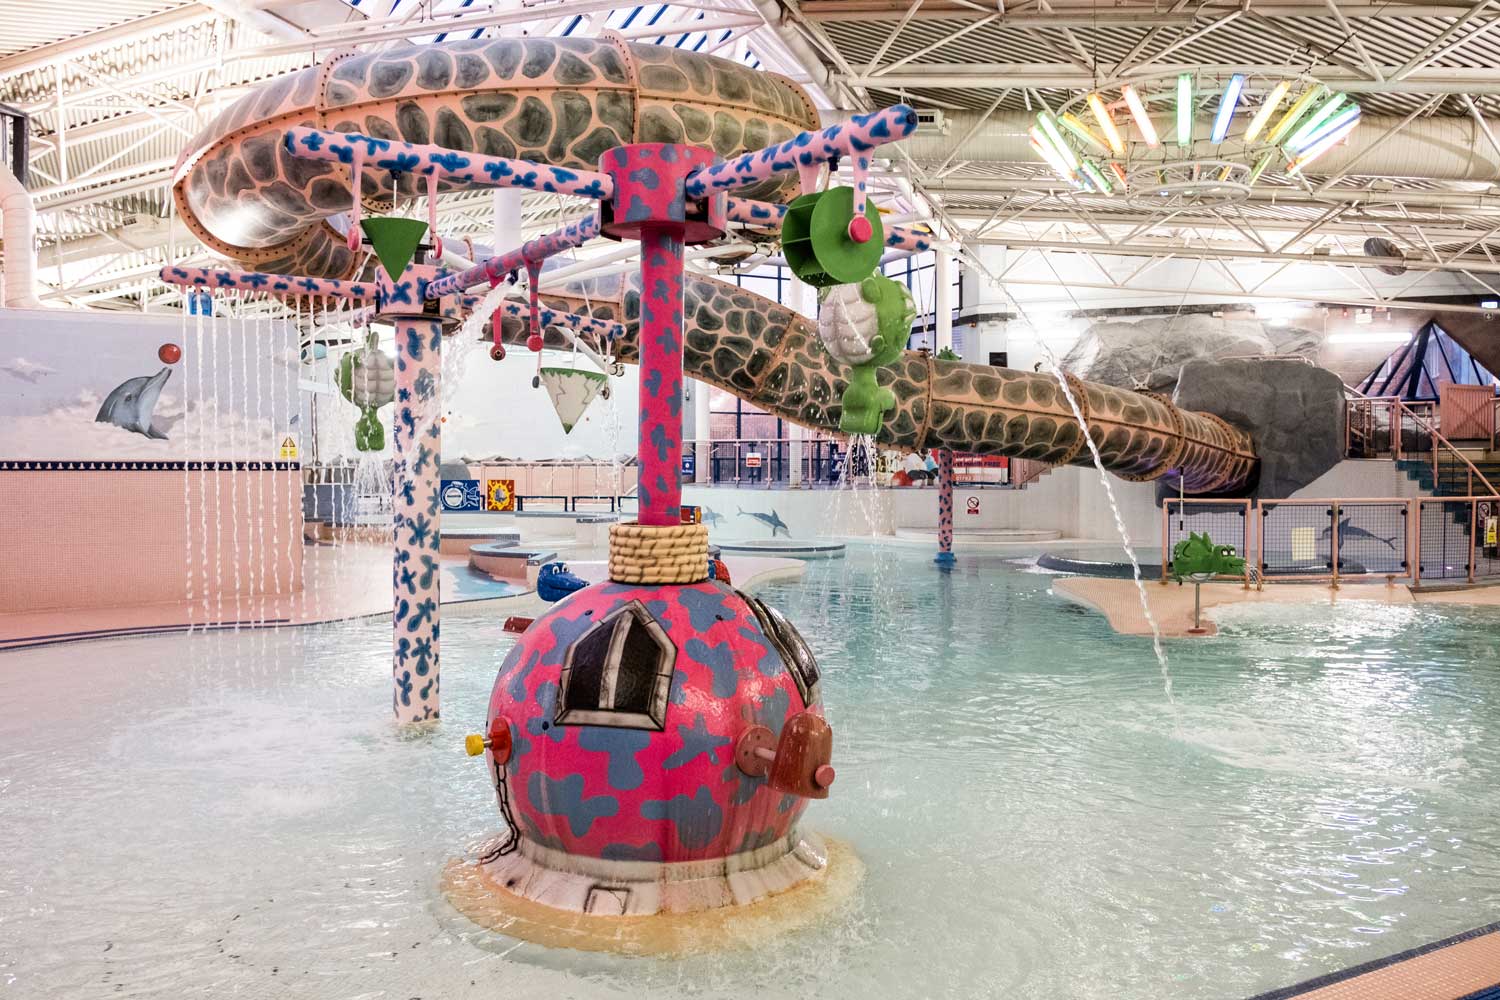 image of waterslide and pool at dimensions leisure centre